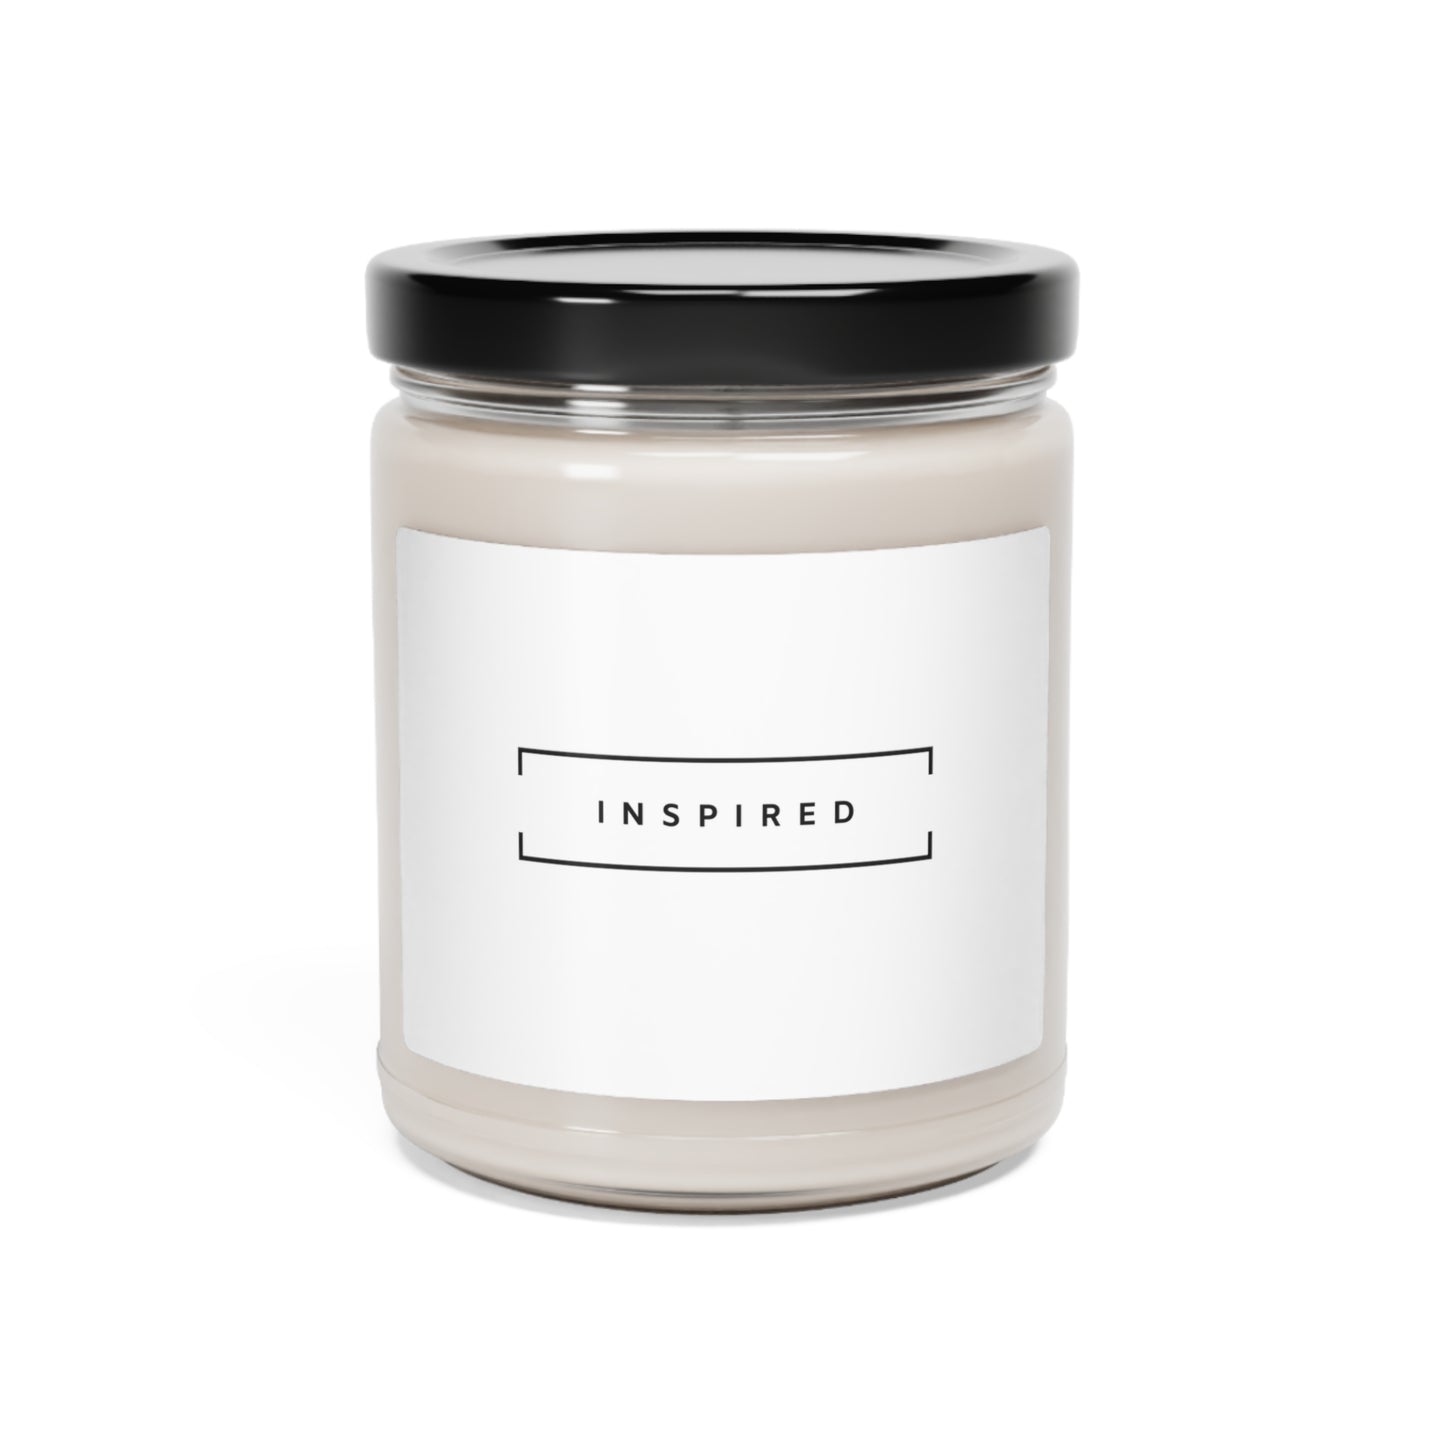 INSPIRED Scented Soy Candle, 9oz